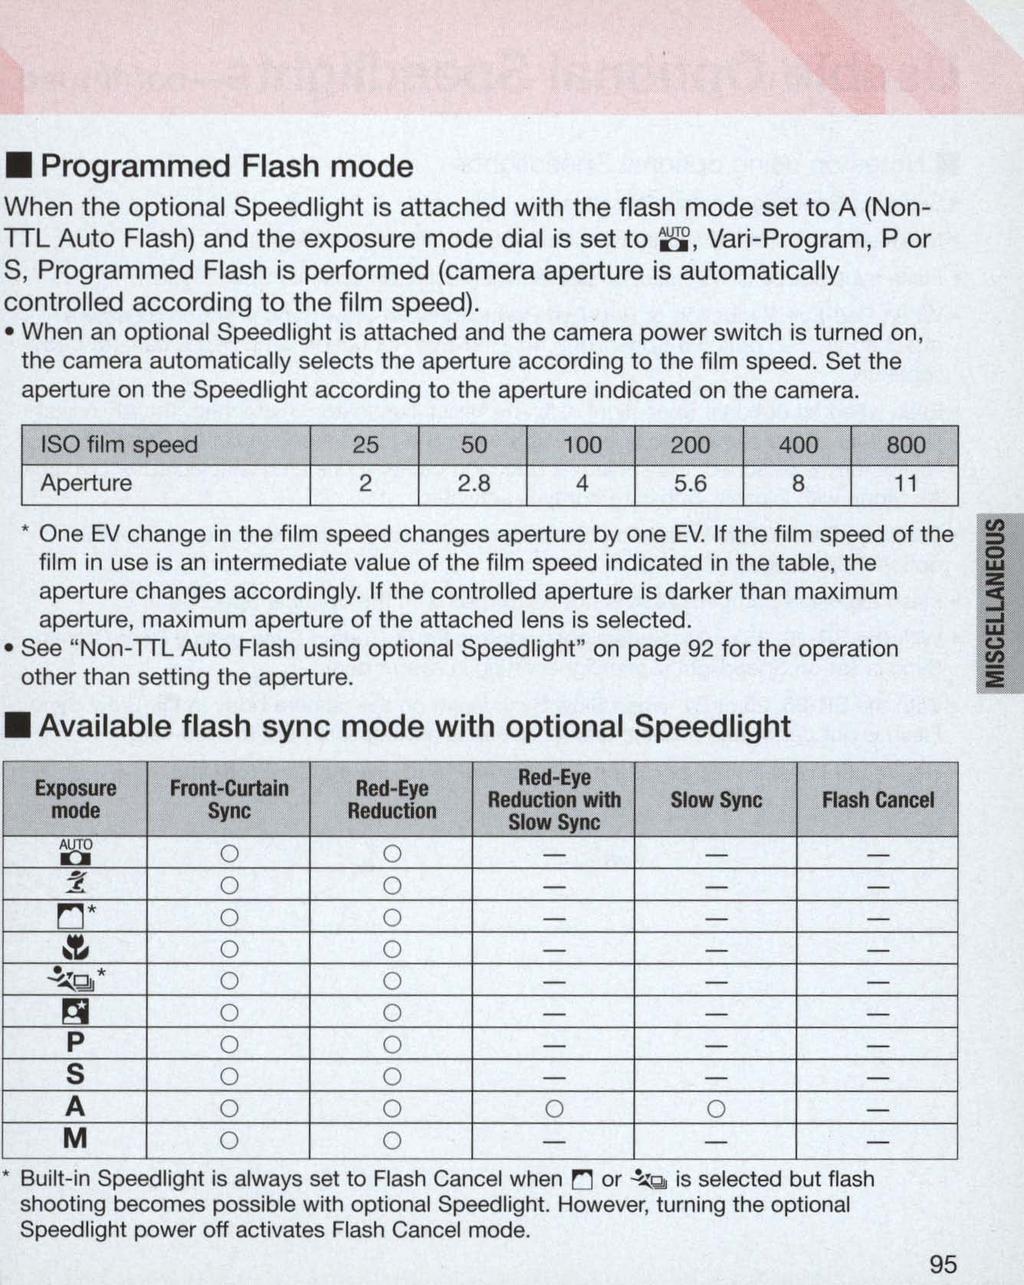 Programmed Flash mode When the optional Speed light is attached with the flash mode set to A (Non TTL Auto Flash) and the exposure mode dial is set to 8, Vari-Program, P or S, Programmed Flash is